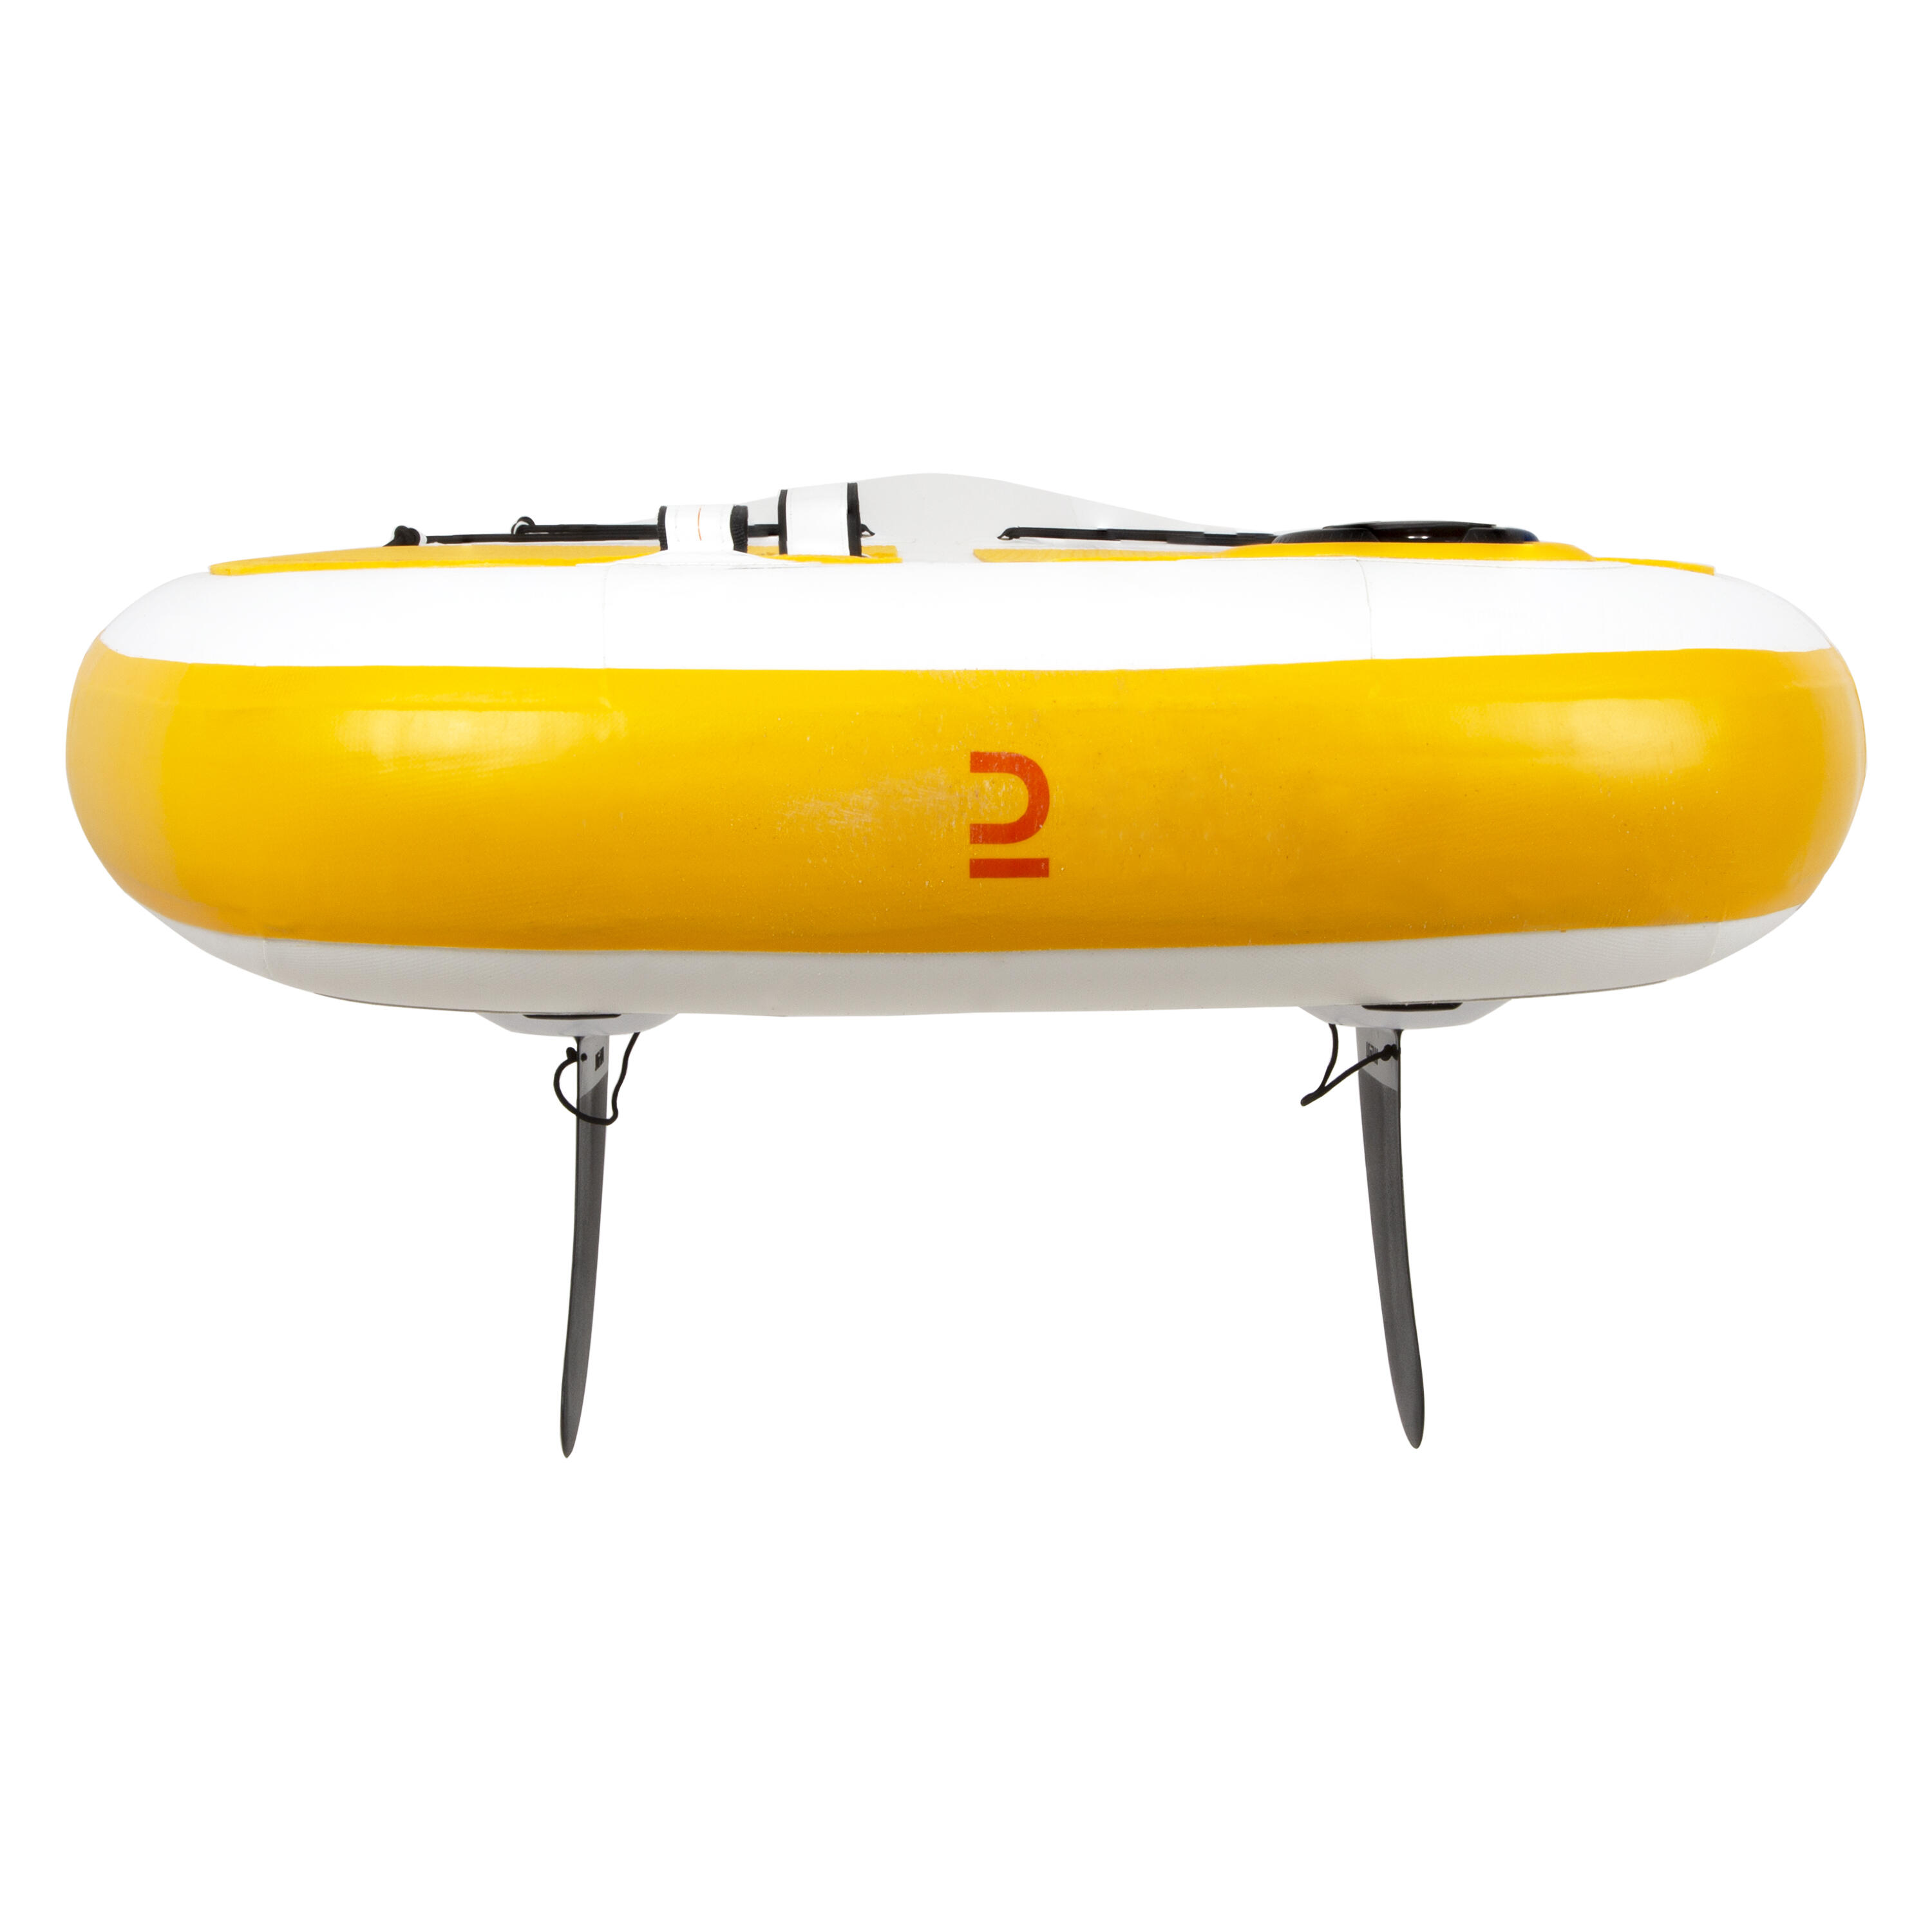 100 COMPACT 8FT (S) INFLATABLE STAND-UP PADDLEBOARD - YELLOW/WHITE (up to 60kg) 10/29